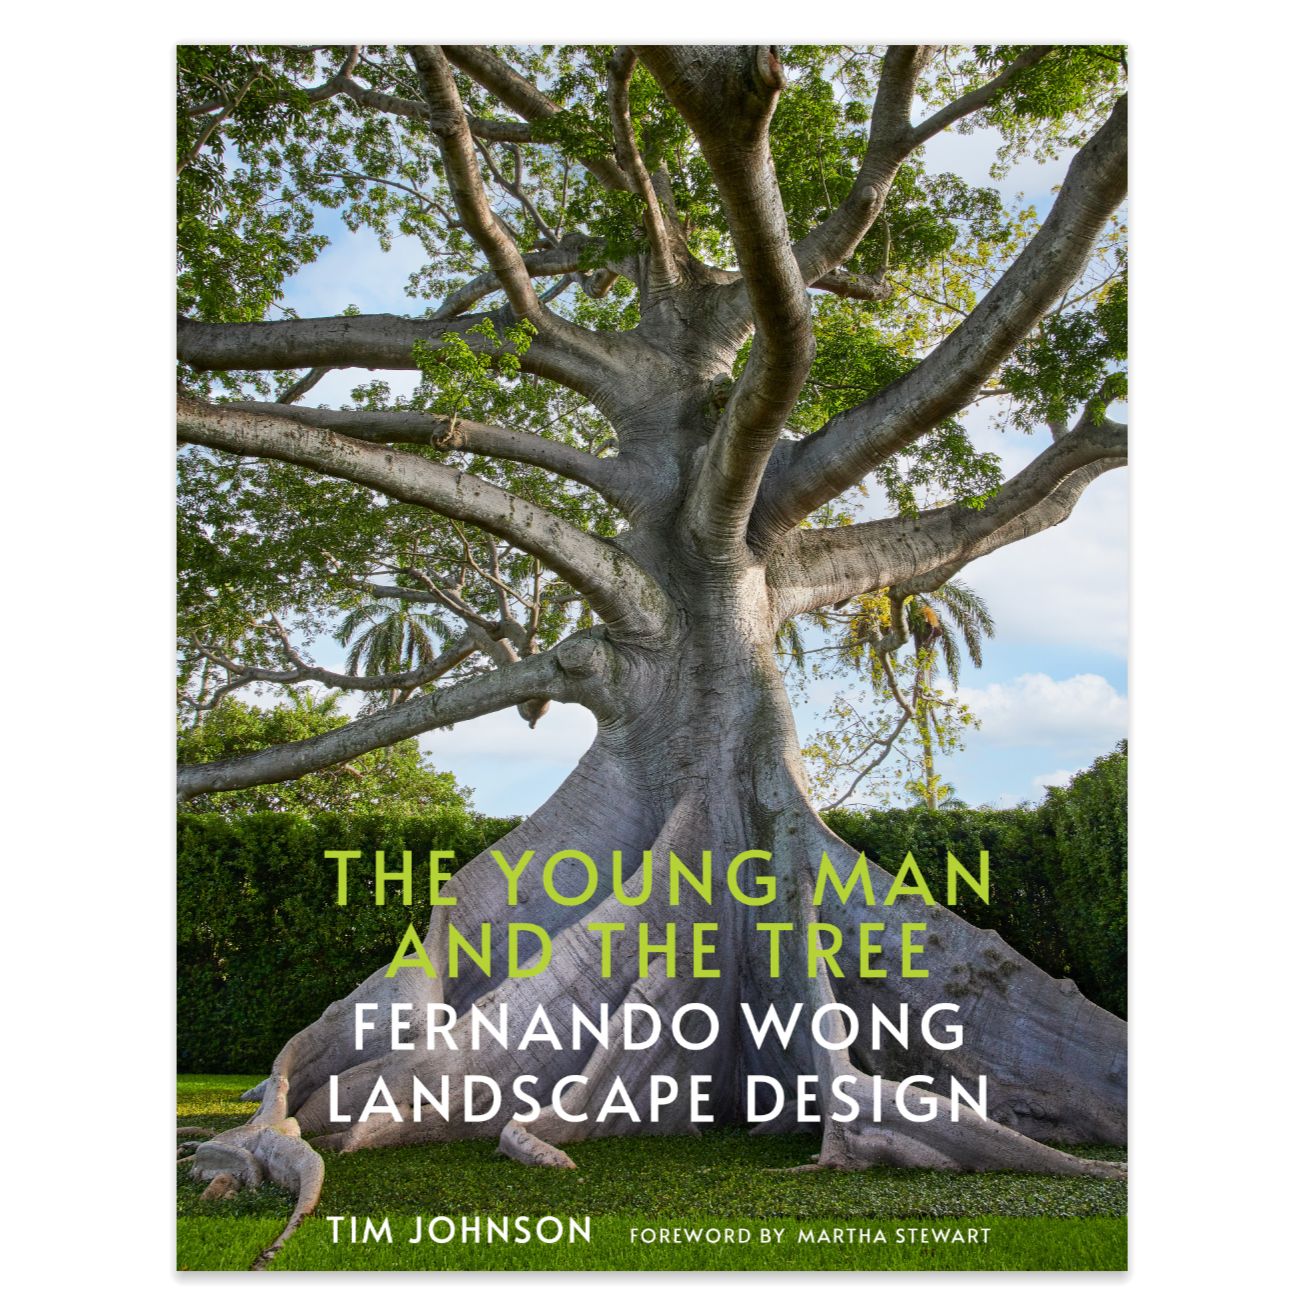 The Young Man and The Tree: Fernando Wong Landscape Design - Signature Edition